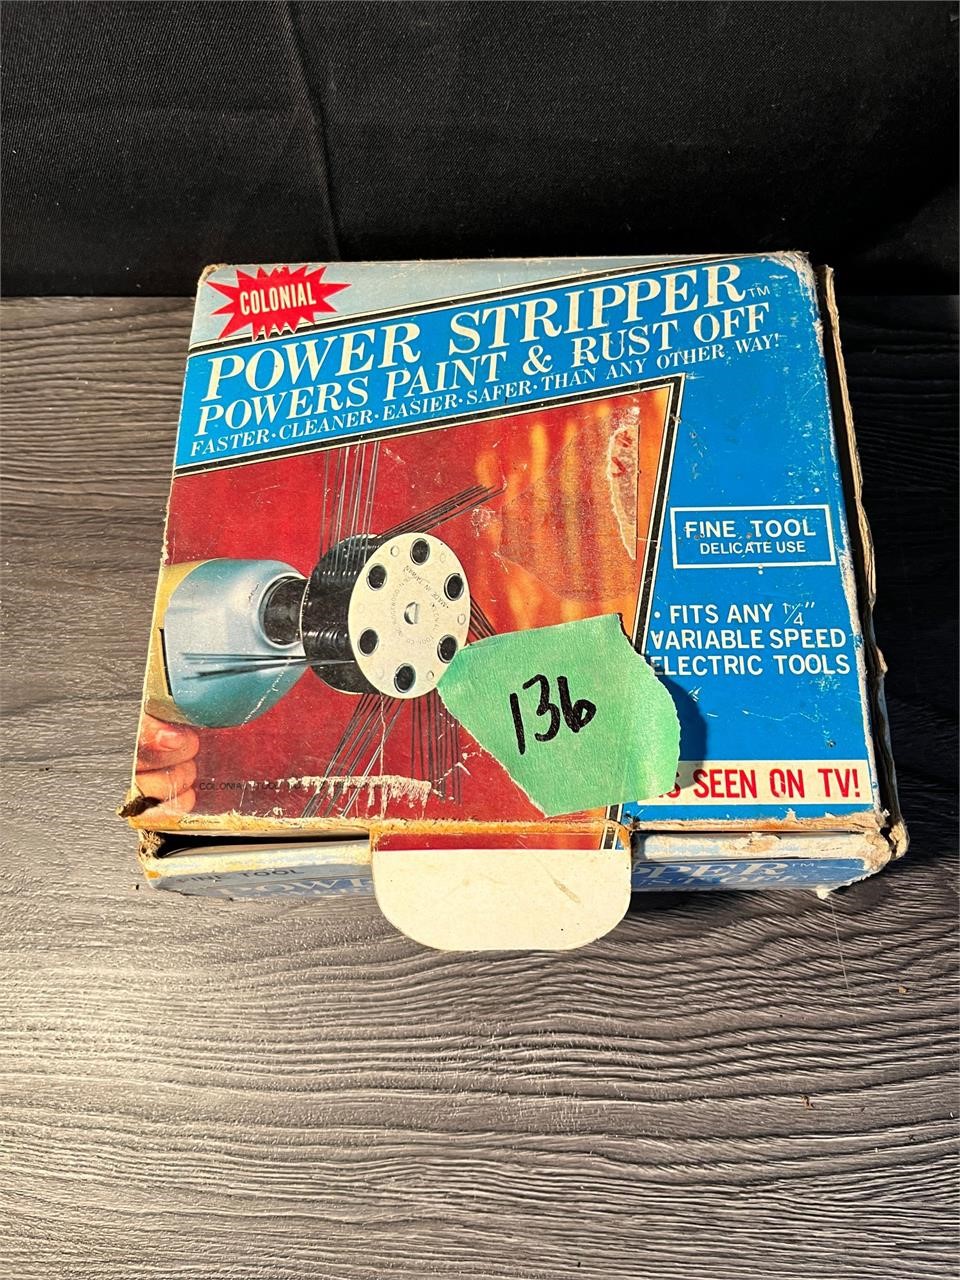 Colonial Power Stripper 1/4" Variable Speed